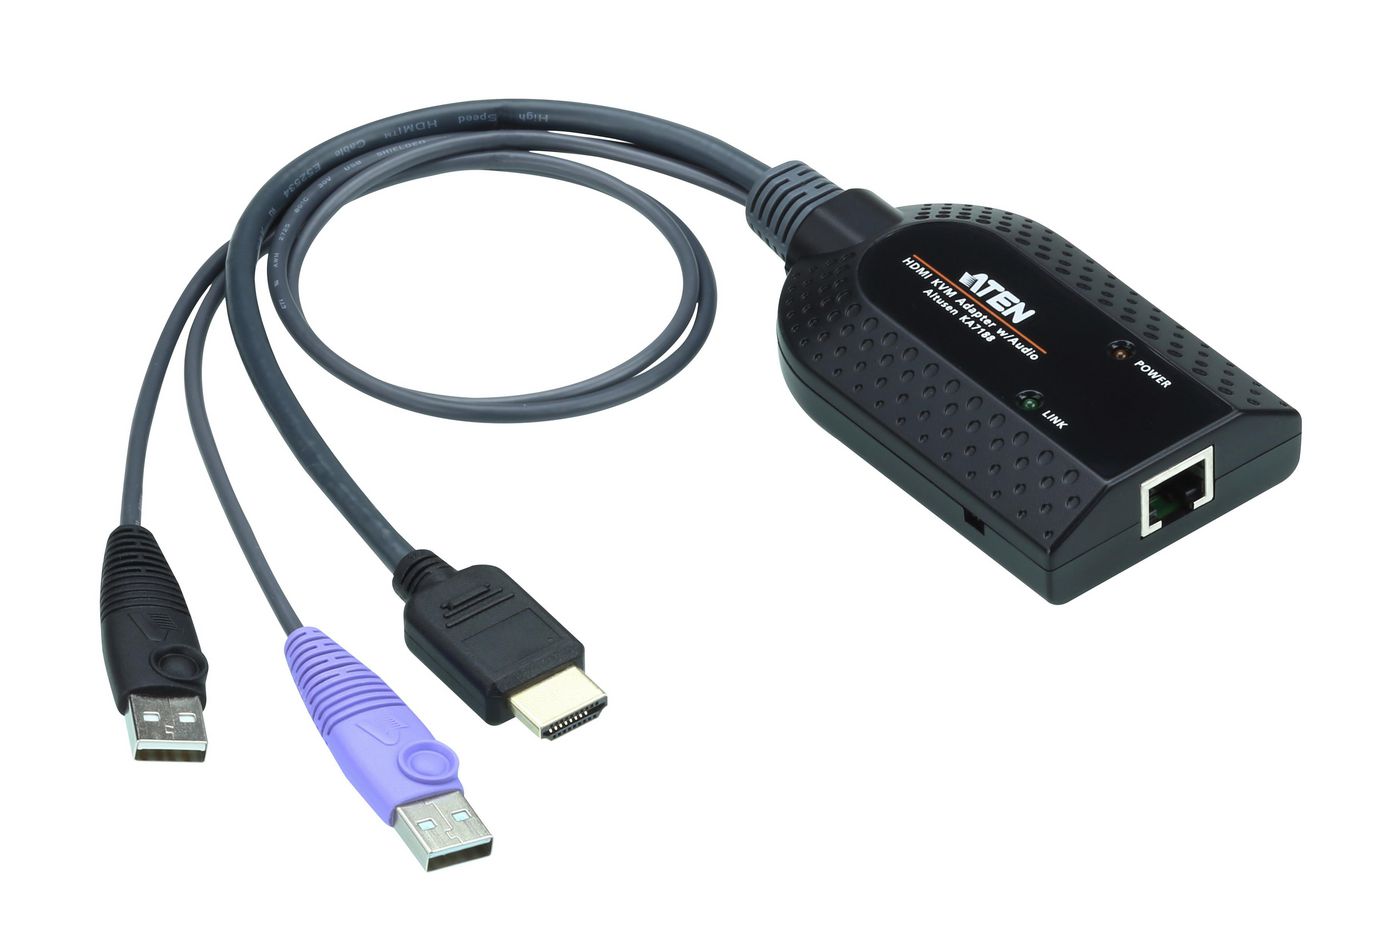 ATEN KVM-Adapterkabel USB / HDMI 0.25 m - The KA7188 KVM Adapter Cable connects a KVM switch to the